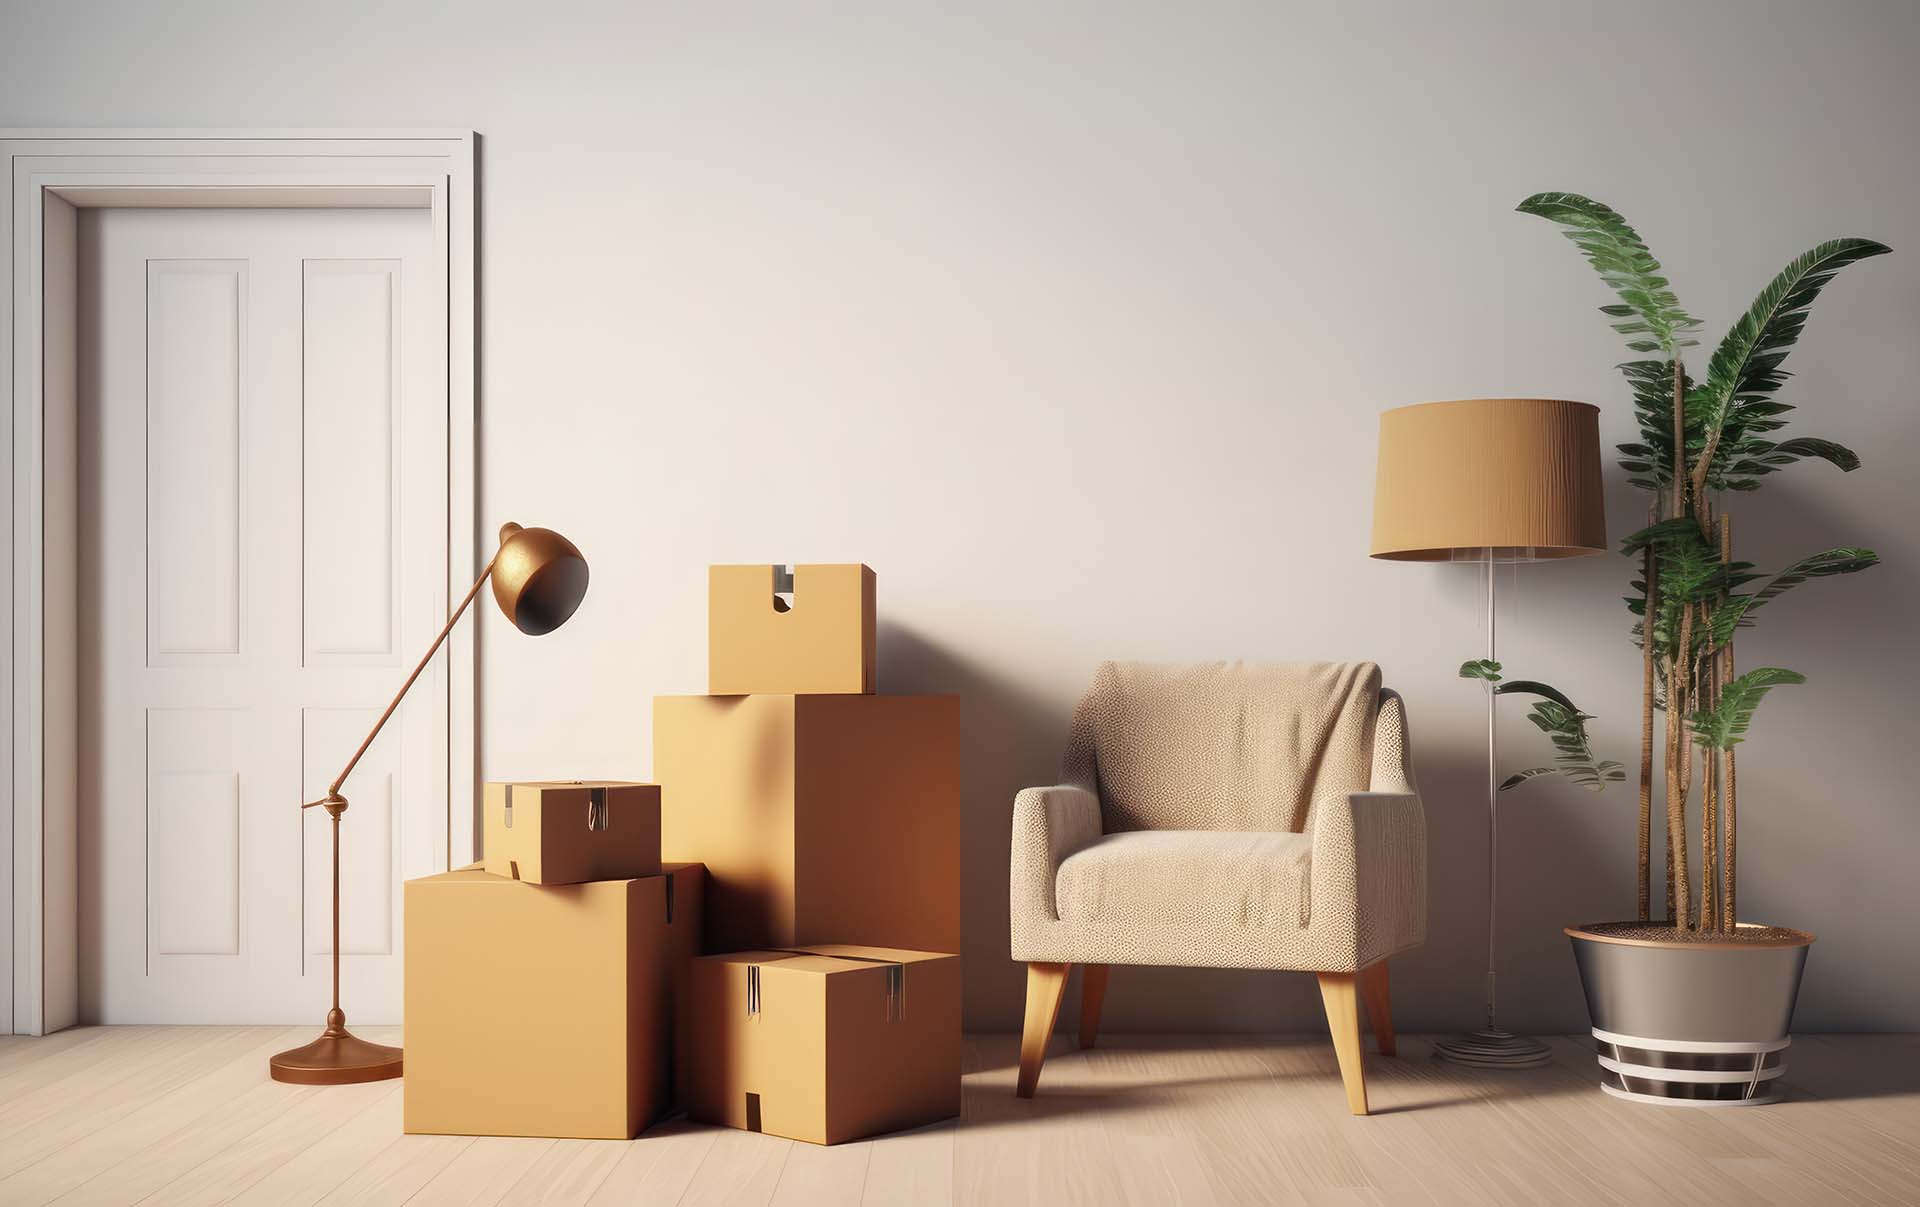 Relocation,Furniture in boxes.Moving to new house service or concept for buying furniture delivery.3d rendering